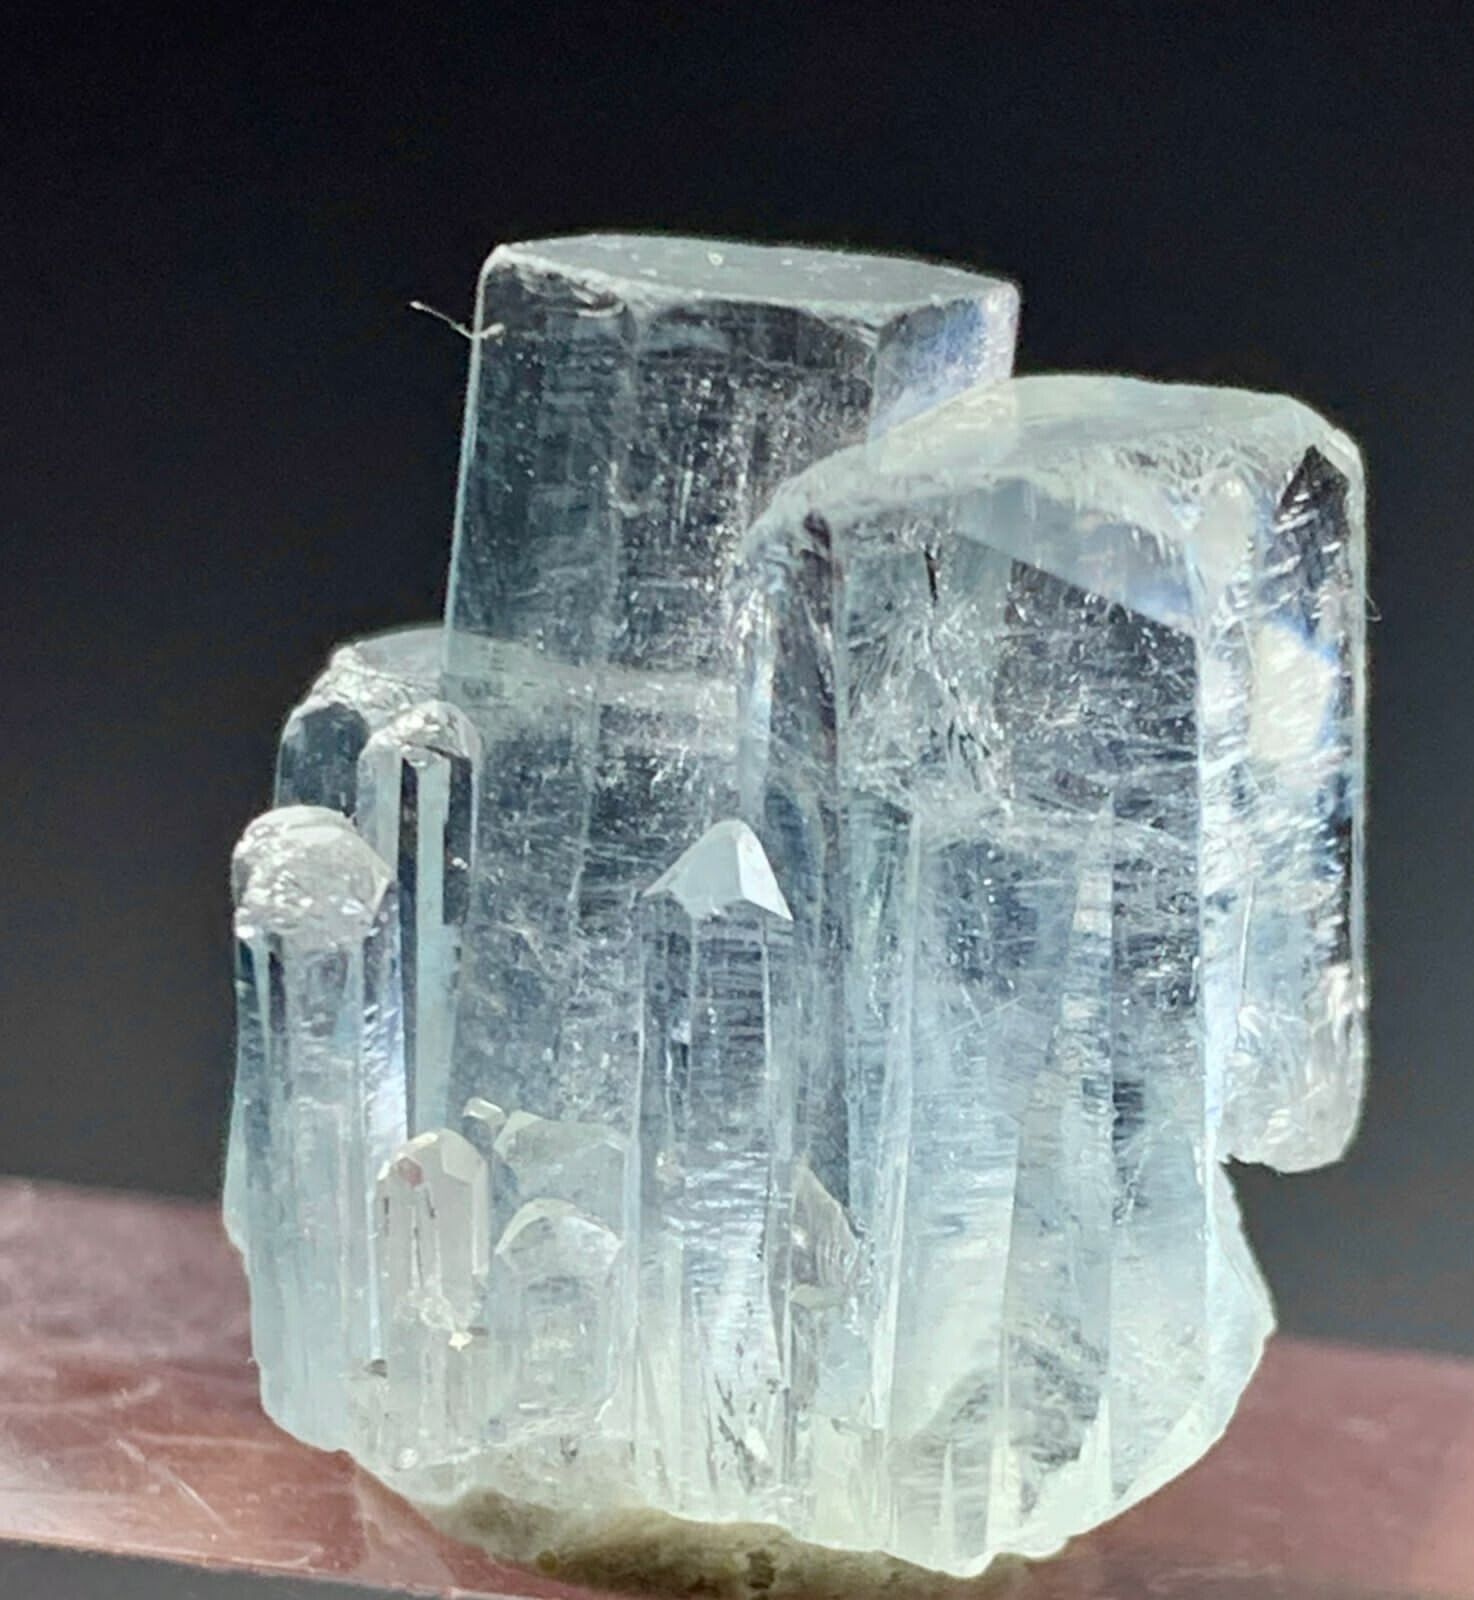 37 Cts Terminated Aquamarine Crystals Bunch from Skardu Pakistan